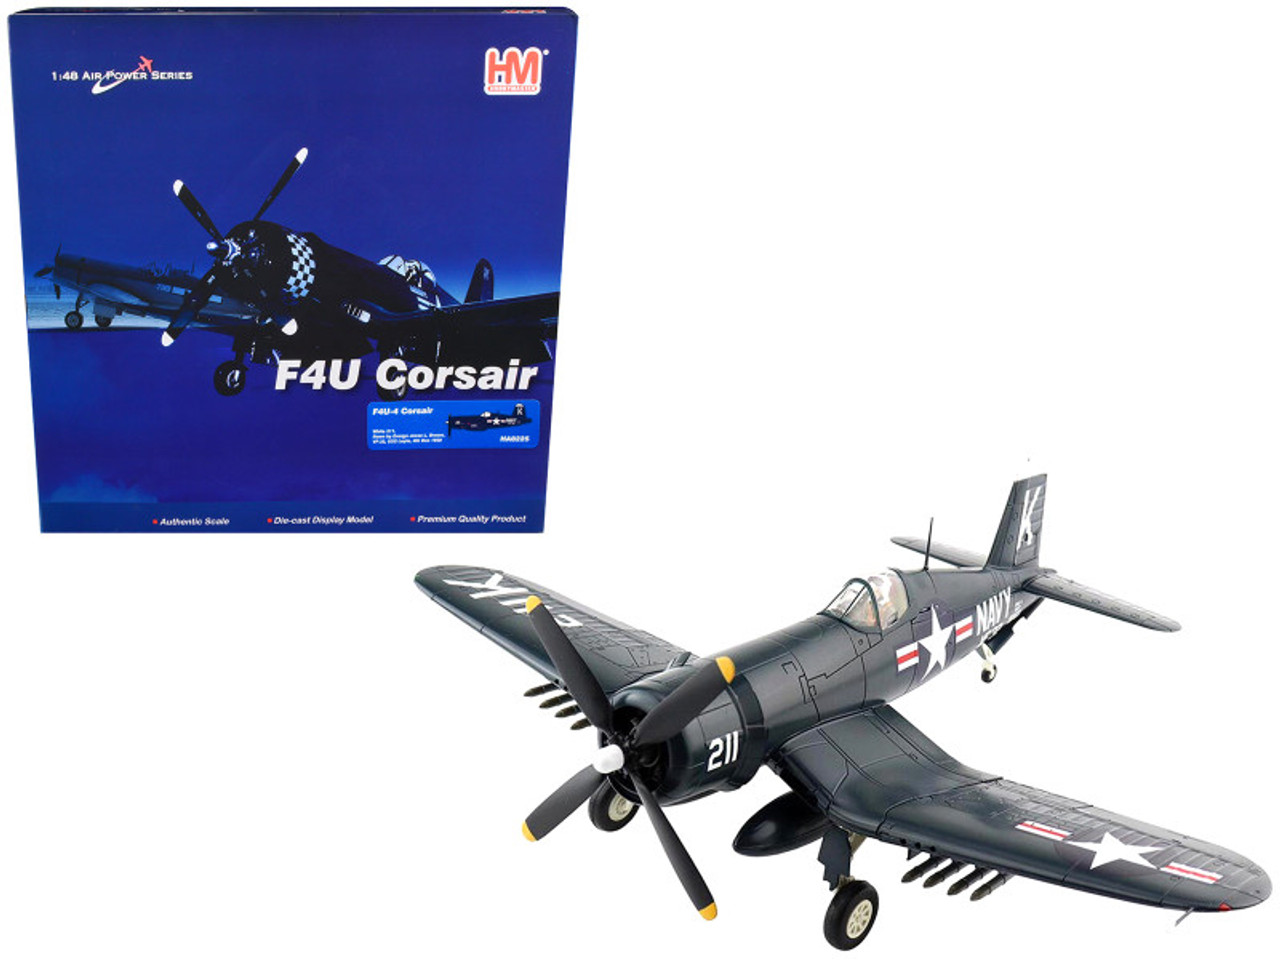 Vought F4U-4 Corsair Fighter Aircraft White 211 "Ensign Jesse L. Brown VF-32 USS Leyte" (4th Dec 1950) "Air Power Series" 1/48 Diecast Model by Hobby Master